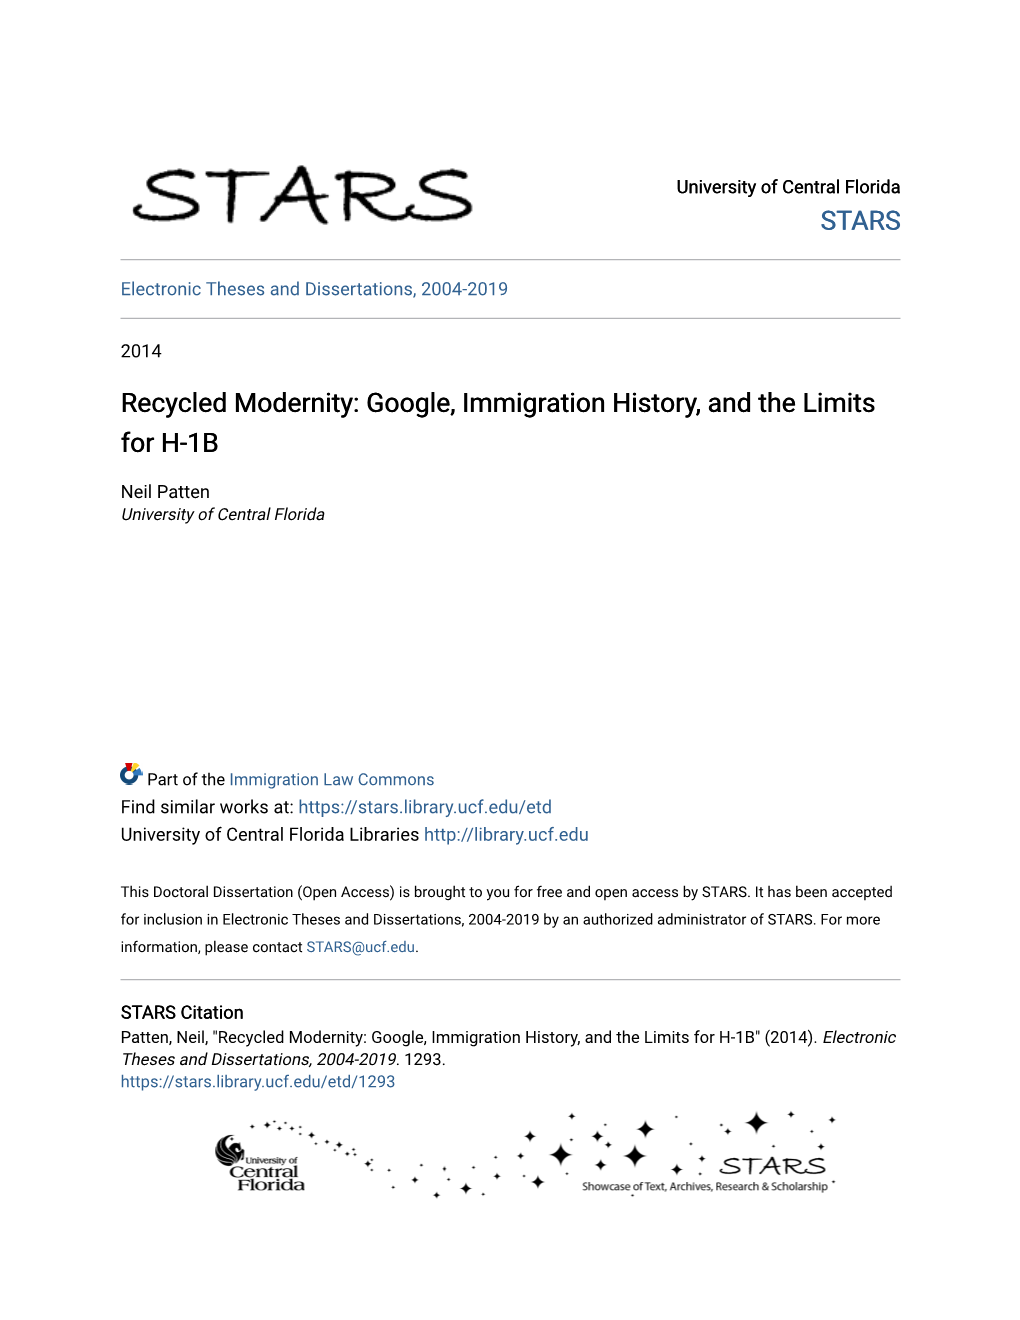 Google, Immigration History, and the Limits for H-1B